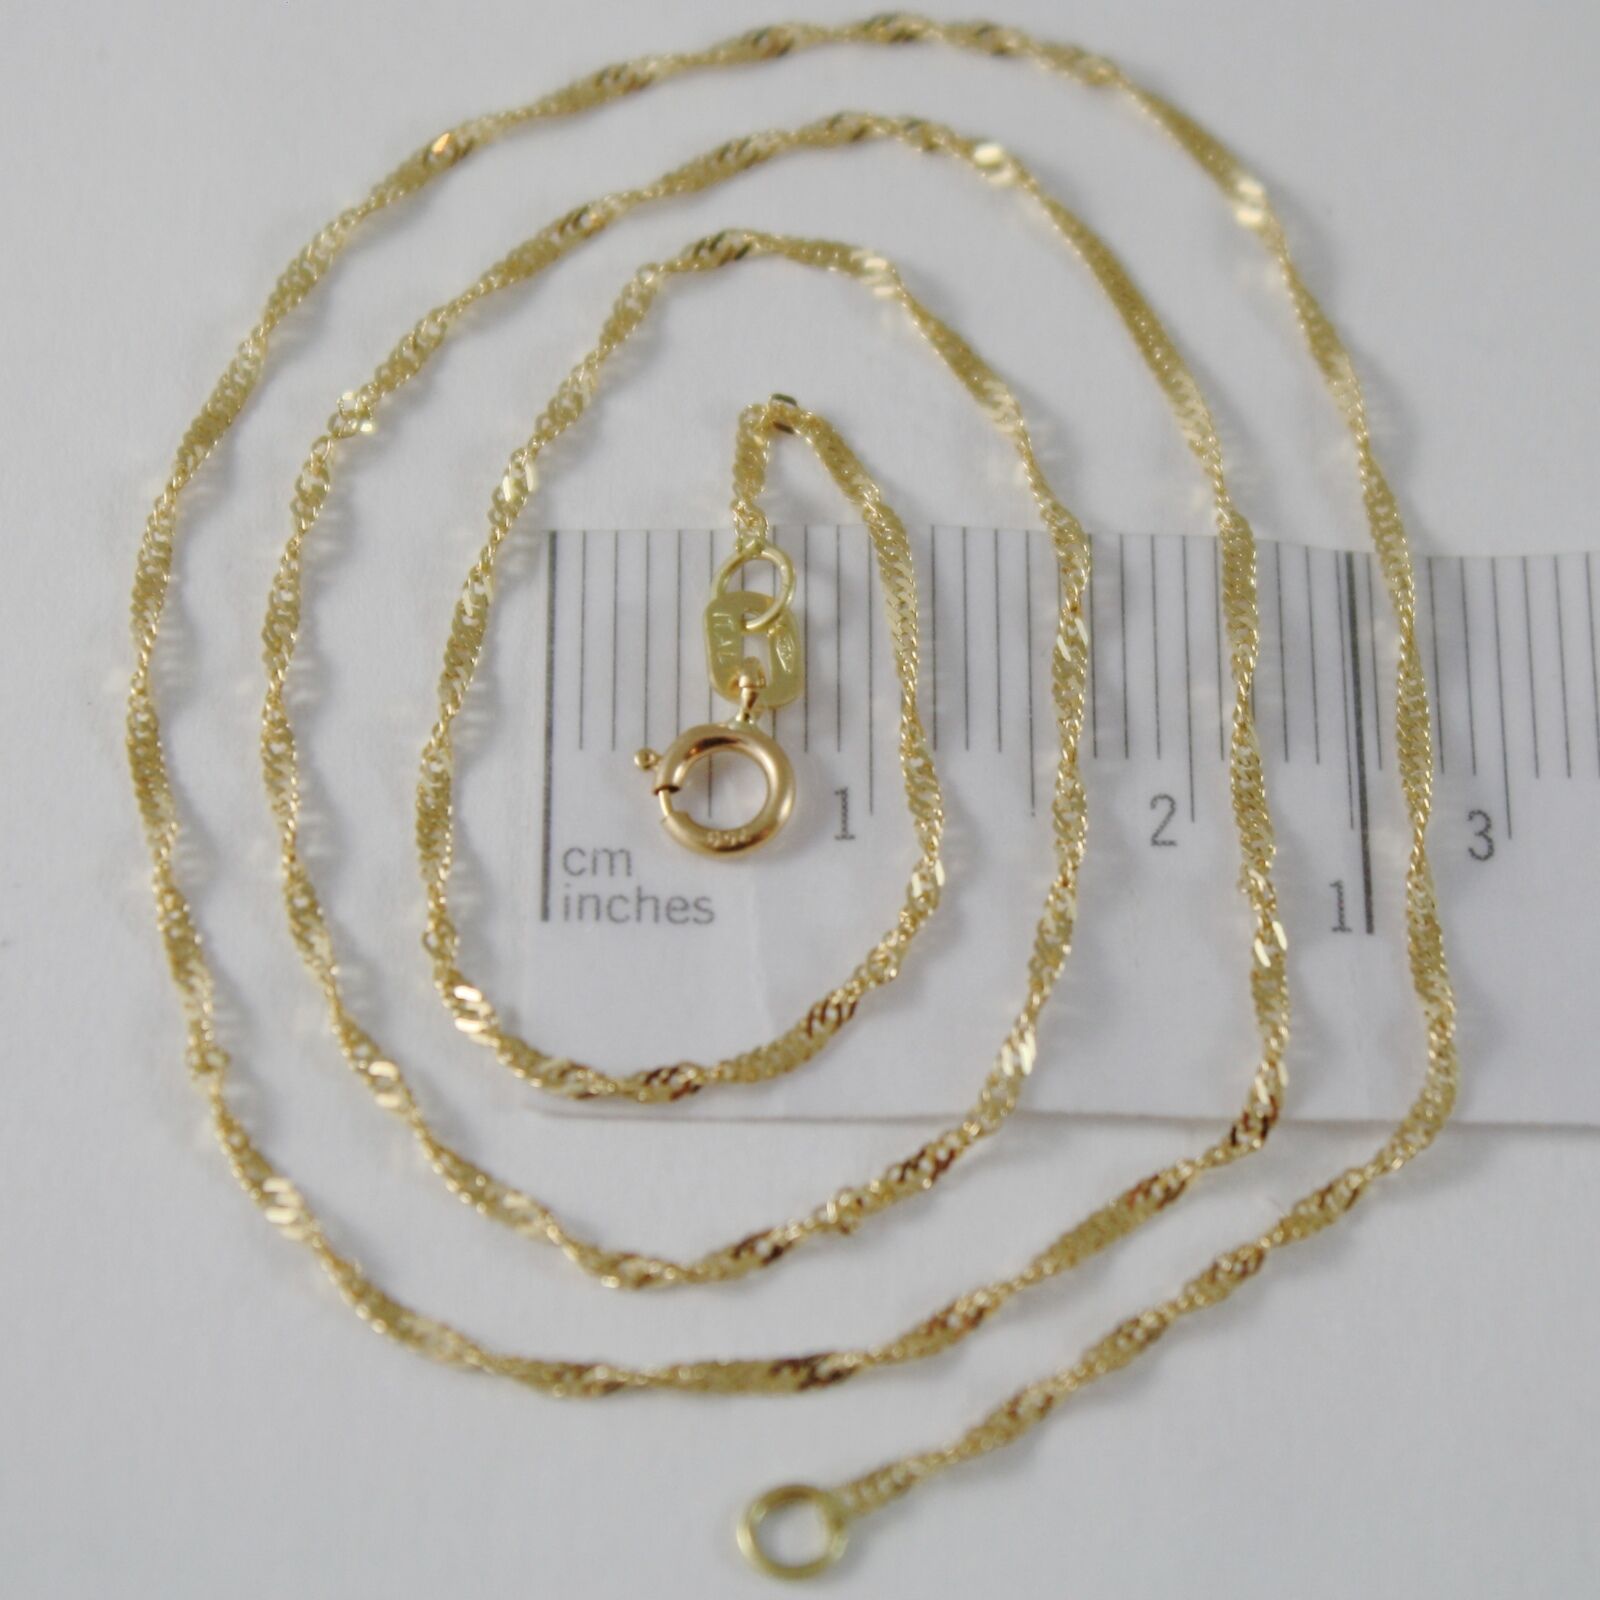 Mens Chain Gold Rope Chain Necklace Gold Chains for Men Stainless Steel  Chains 3mm Rope 18 / 20 / 22 Chain 